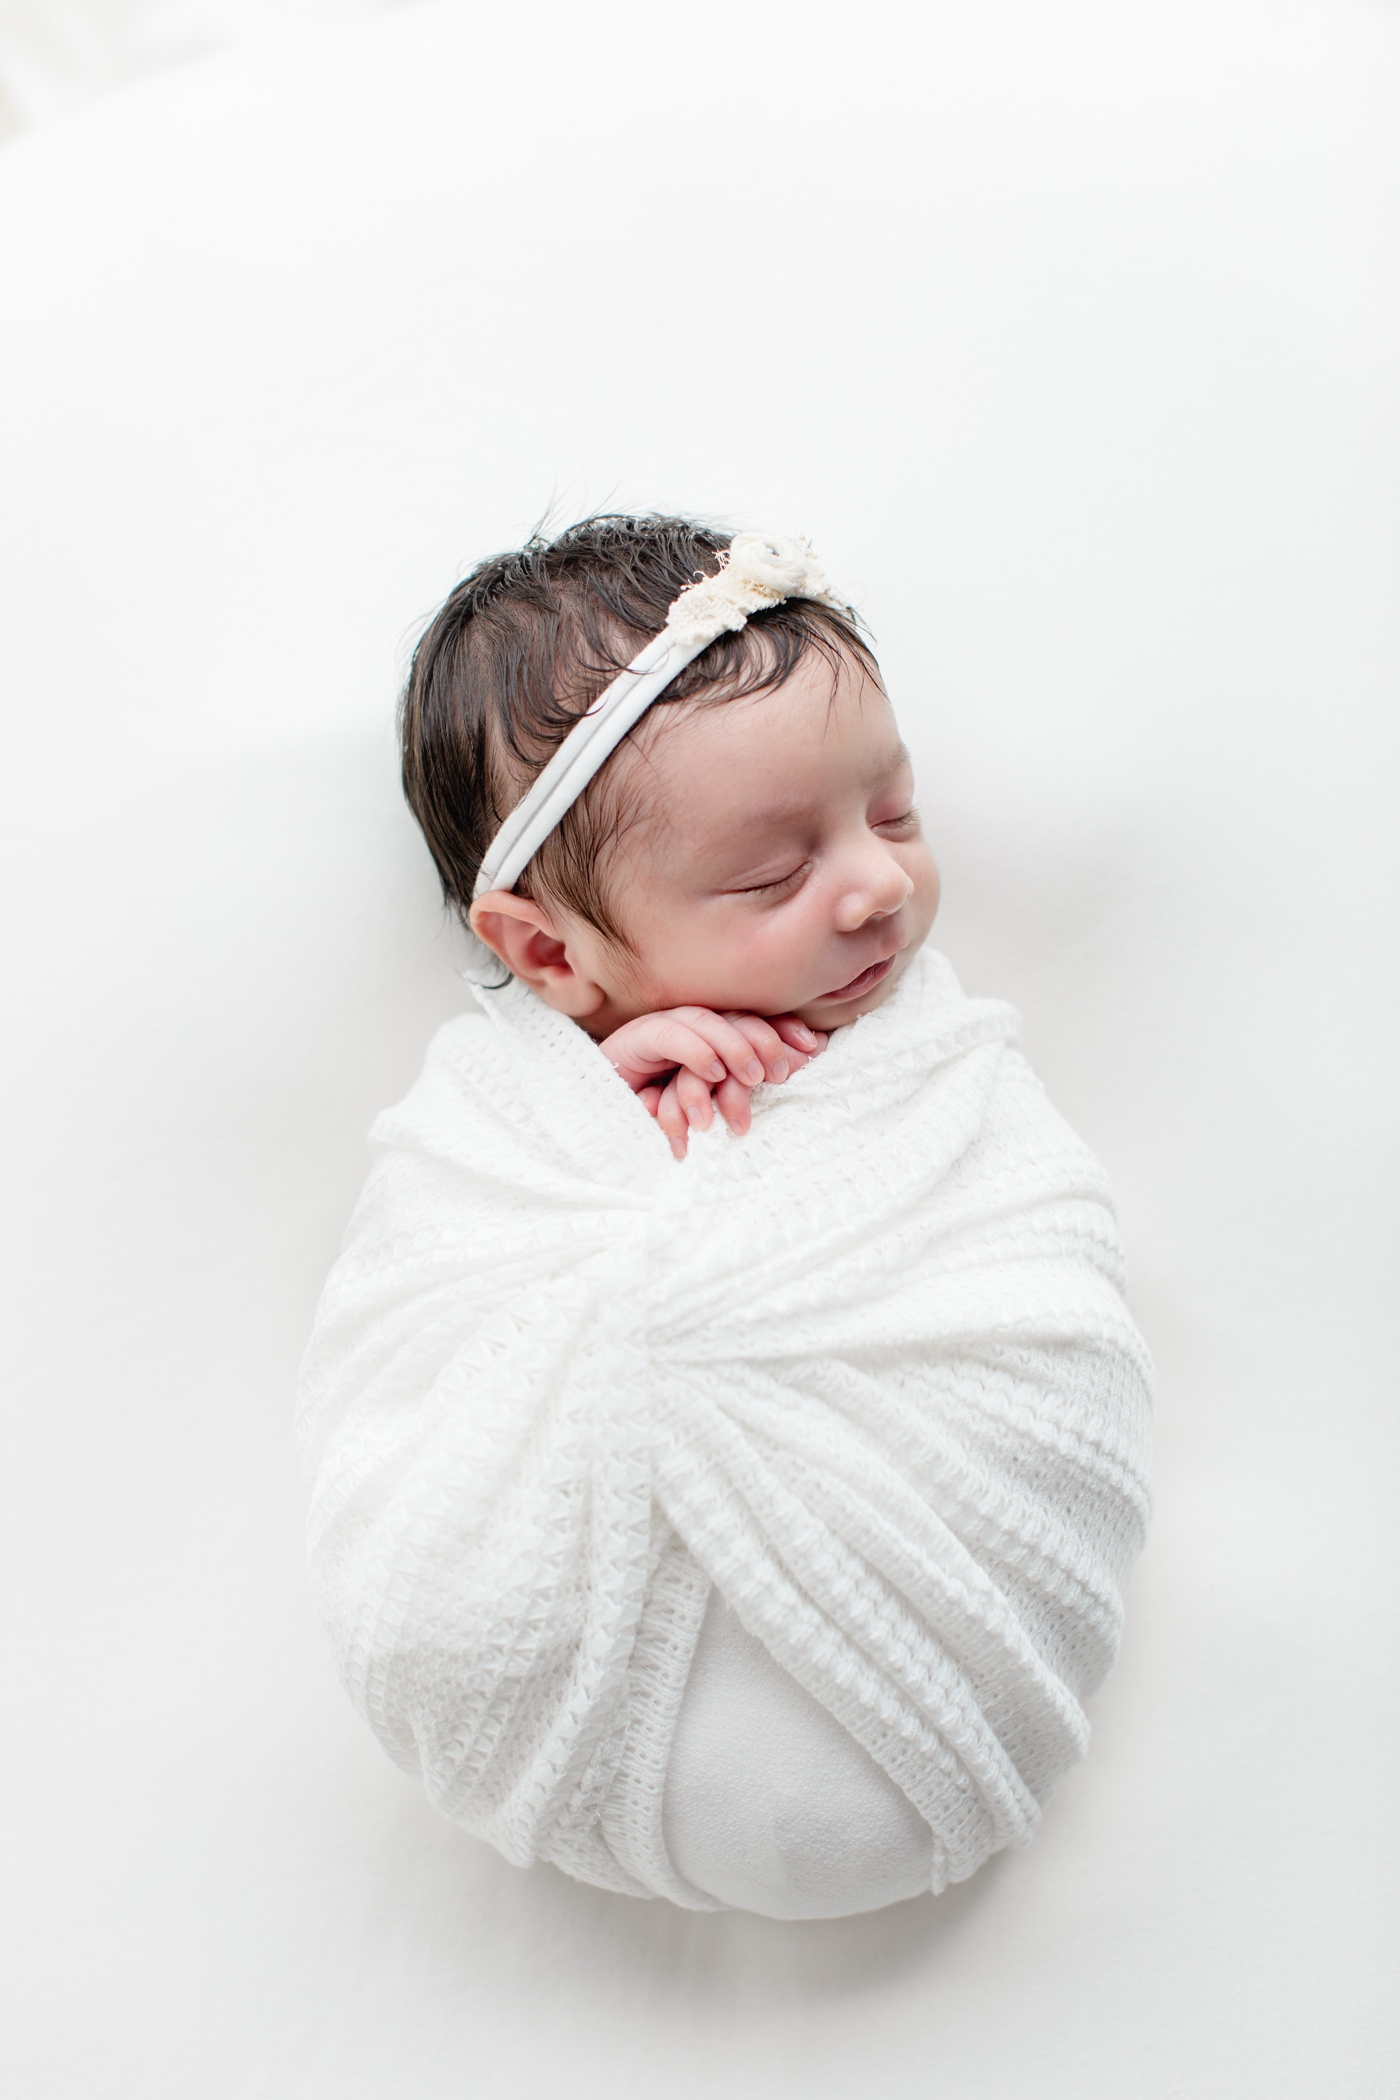 Baby girl in white wrap during studio newborn session in North Austin, TX. Photo by Sana Ahmed Photography